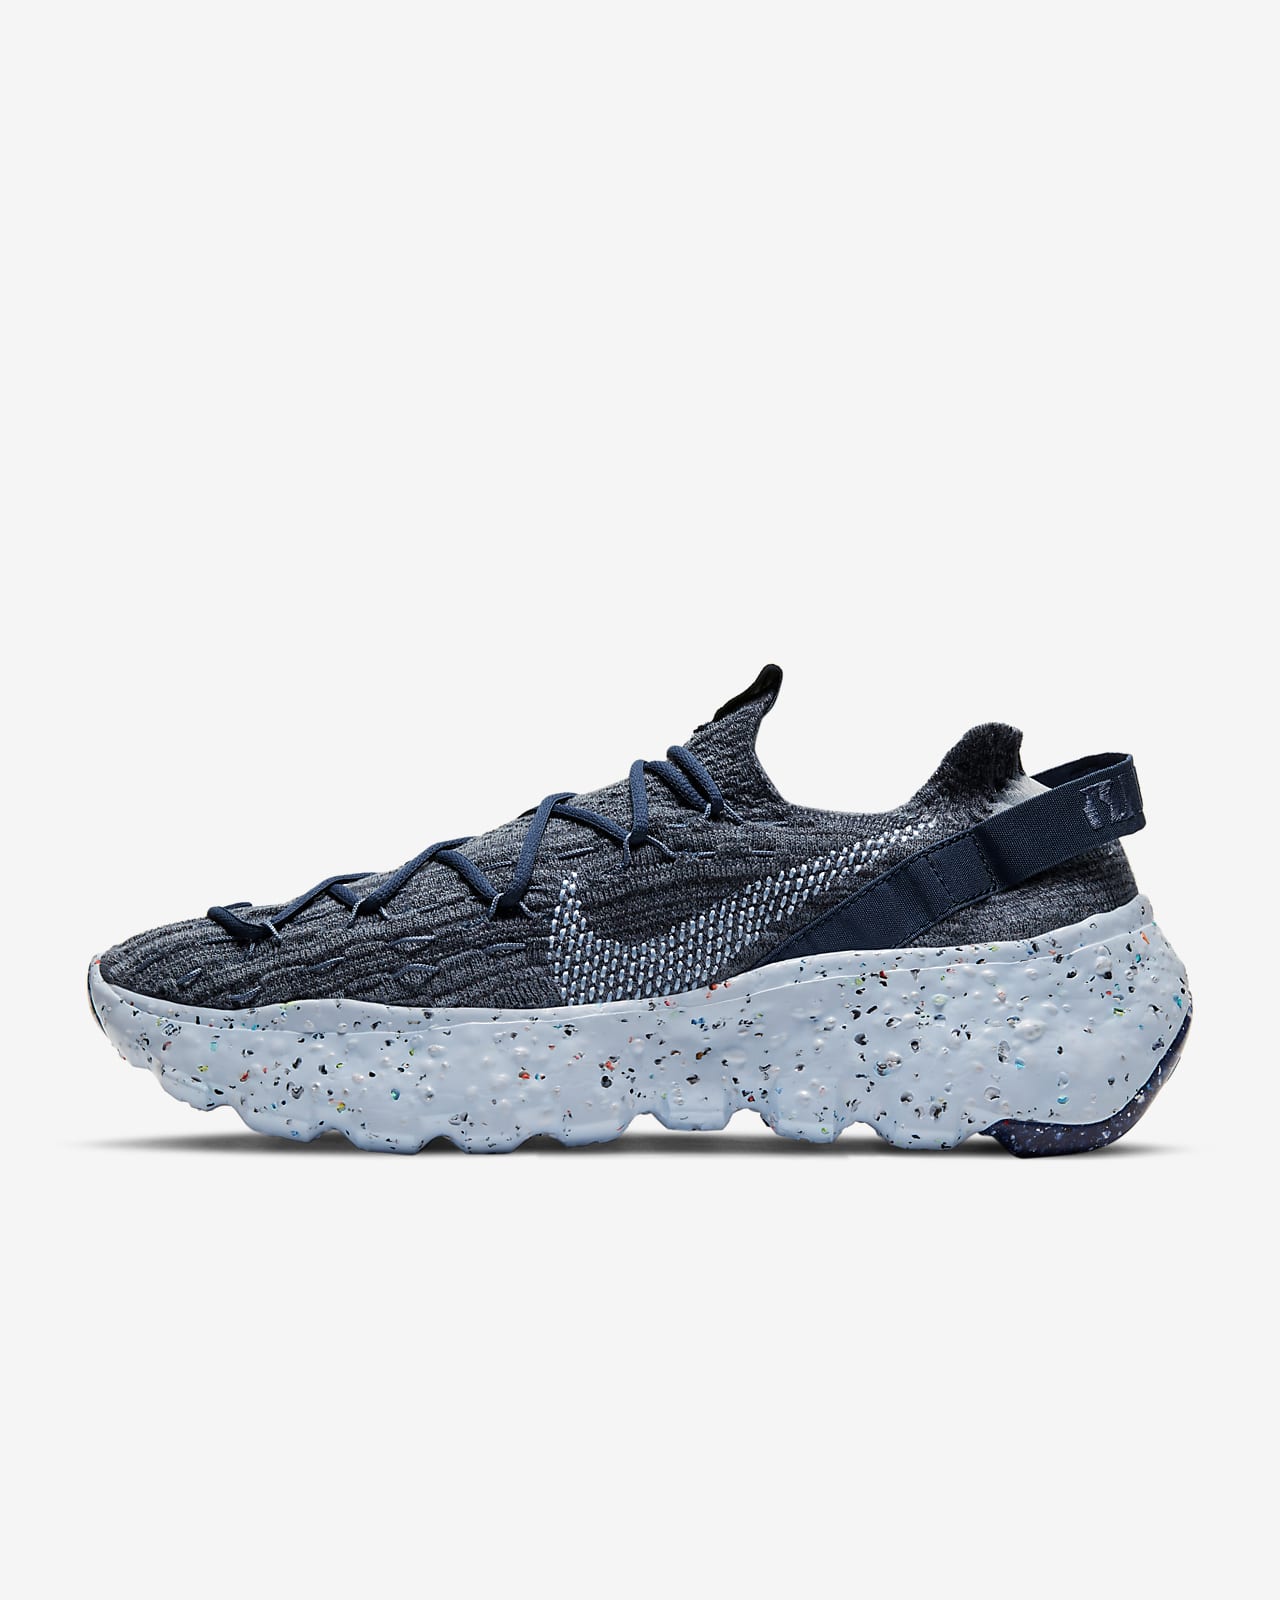 Nike Space Hippie 04 ‘Chambray Blue’ .50 Free Shipping